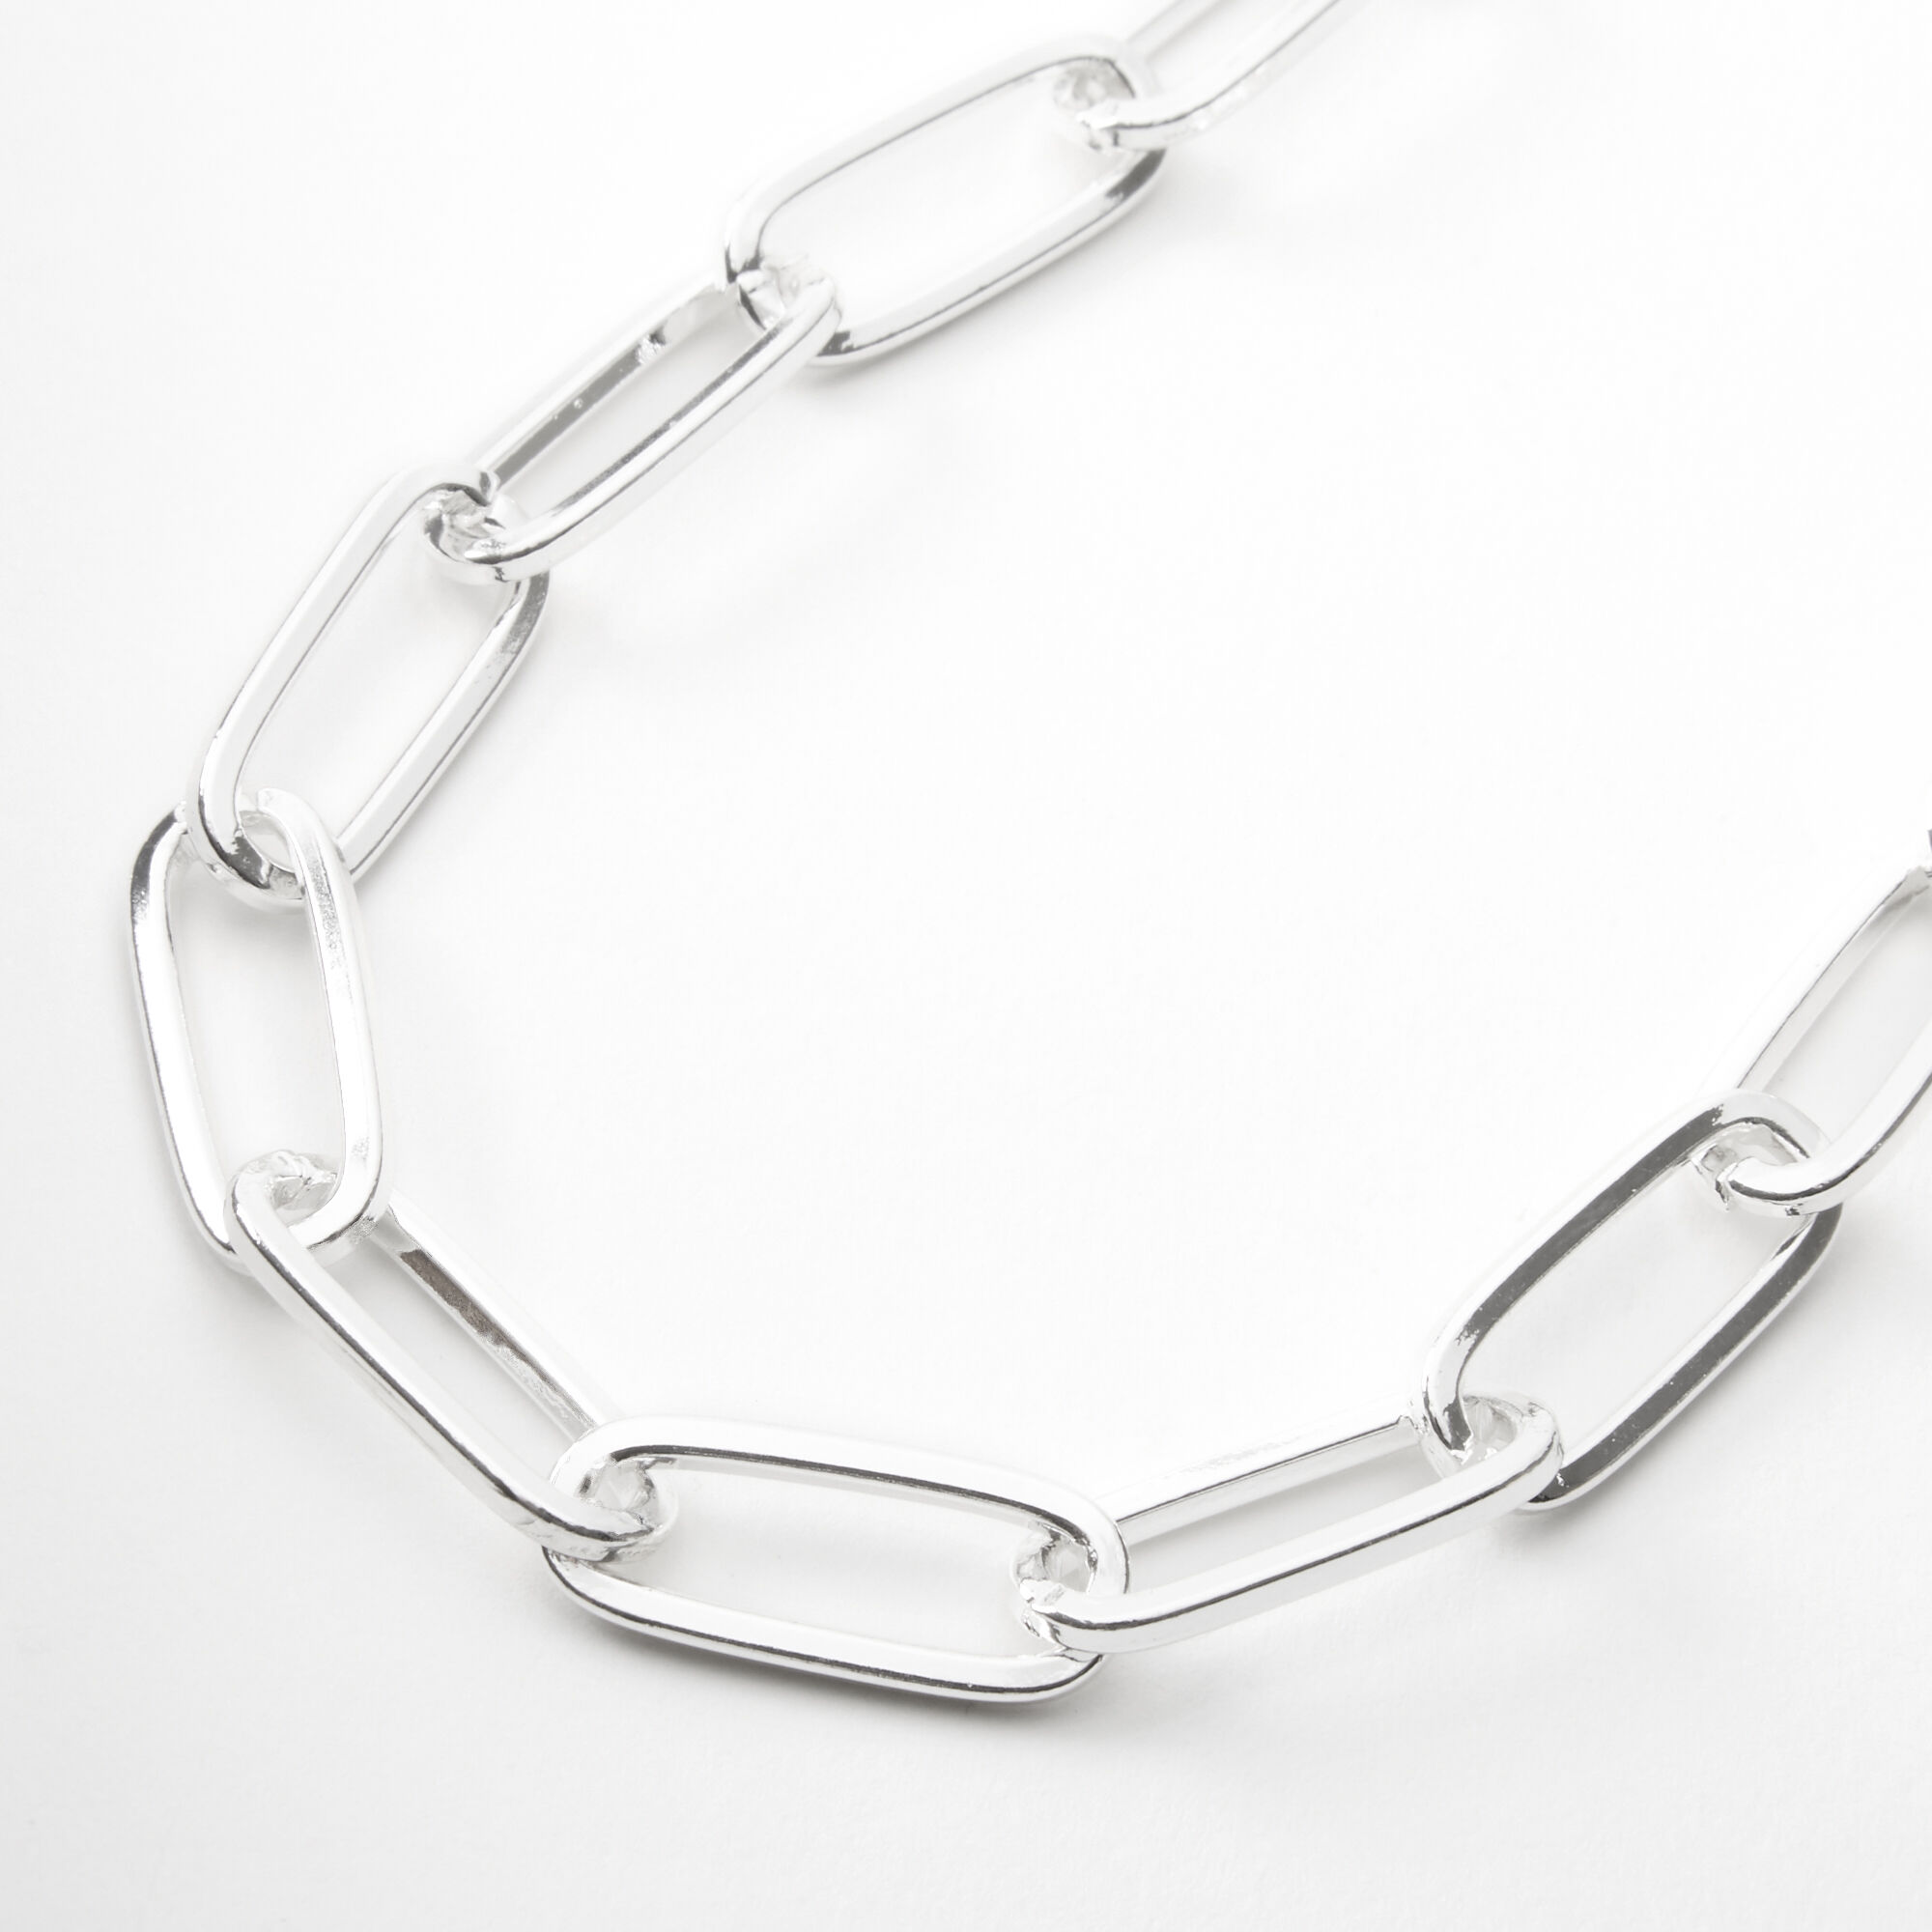 LARGE WHITE CZ CARABINER PAPERCLIP CHAIN, SILVER ON SILVER – JEN HANSEN